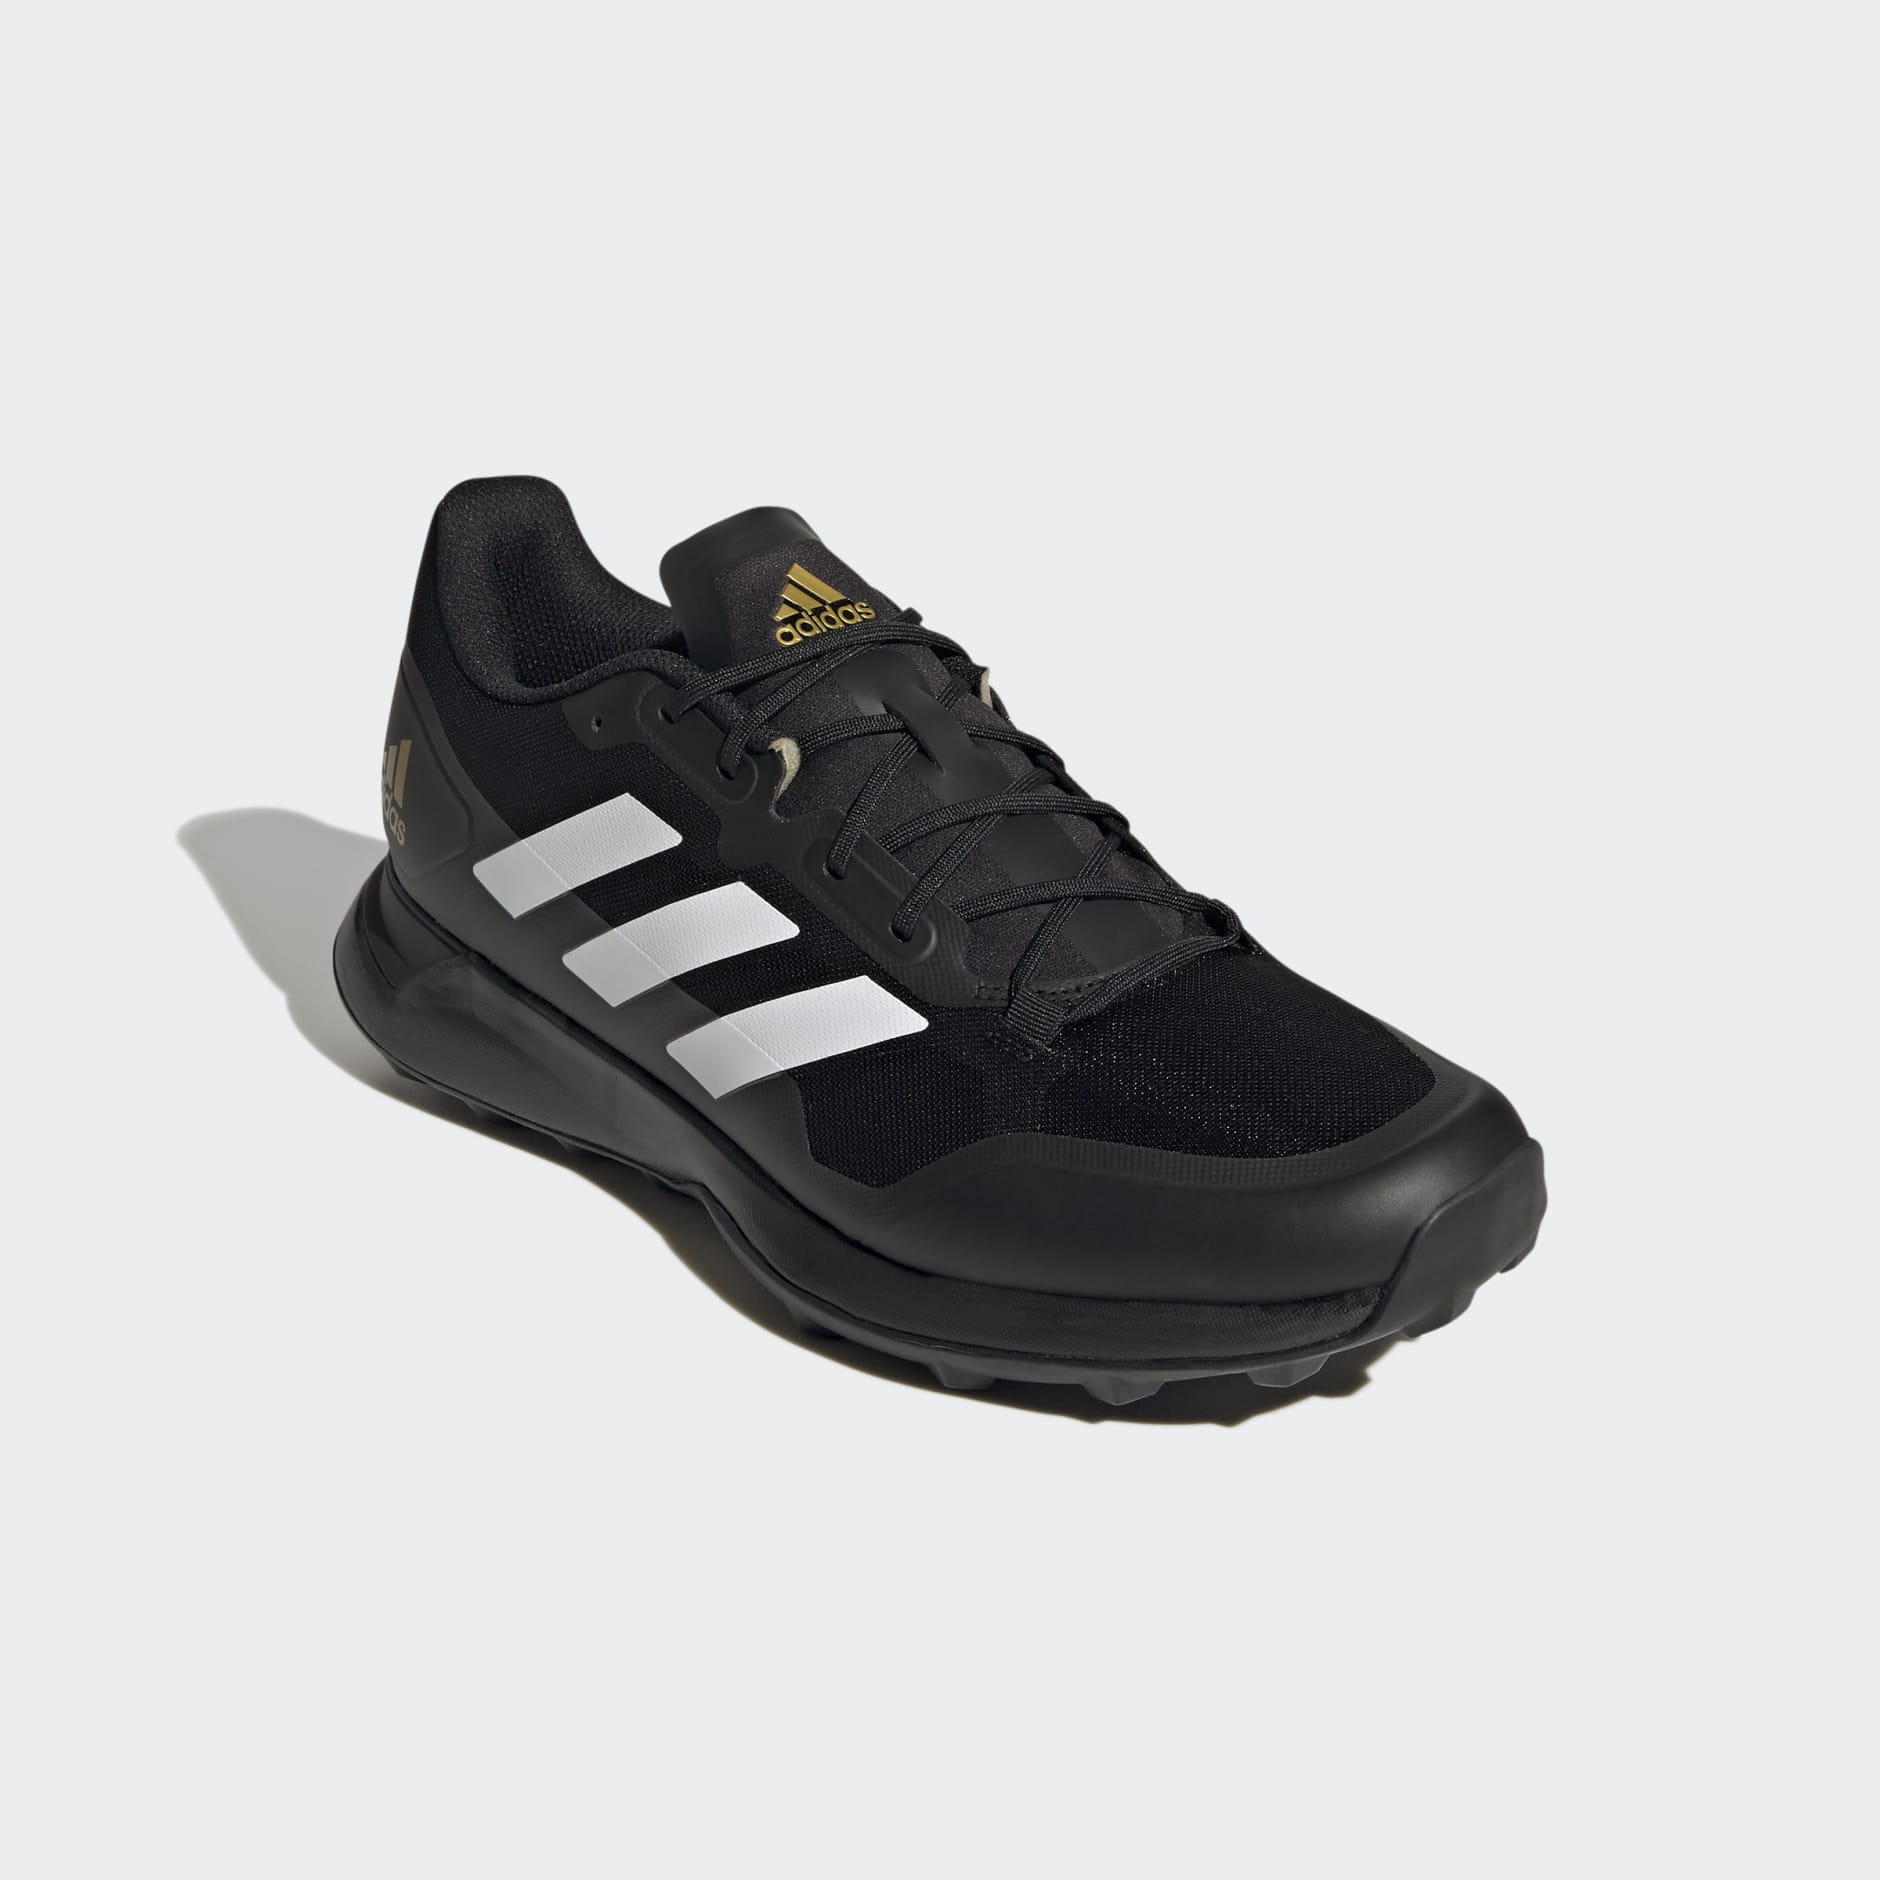 All products - Zone Dox 2.2 S Boots - Black | adidas South Africa